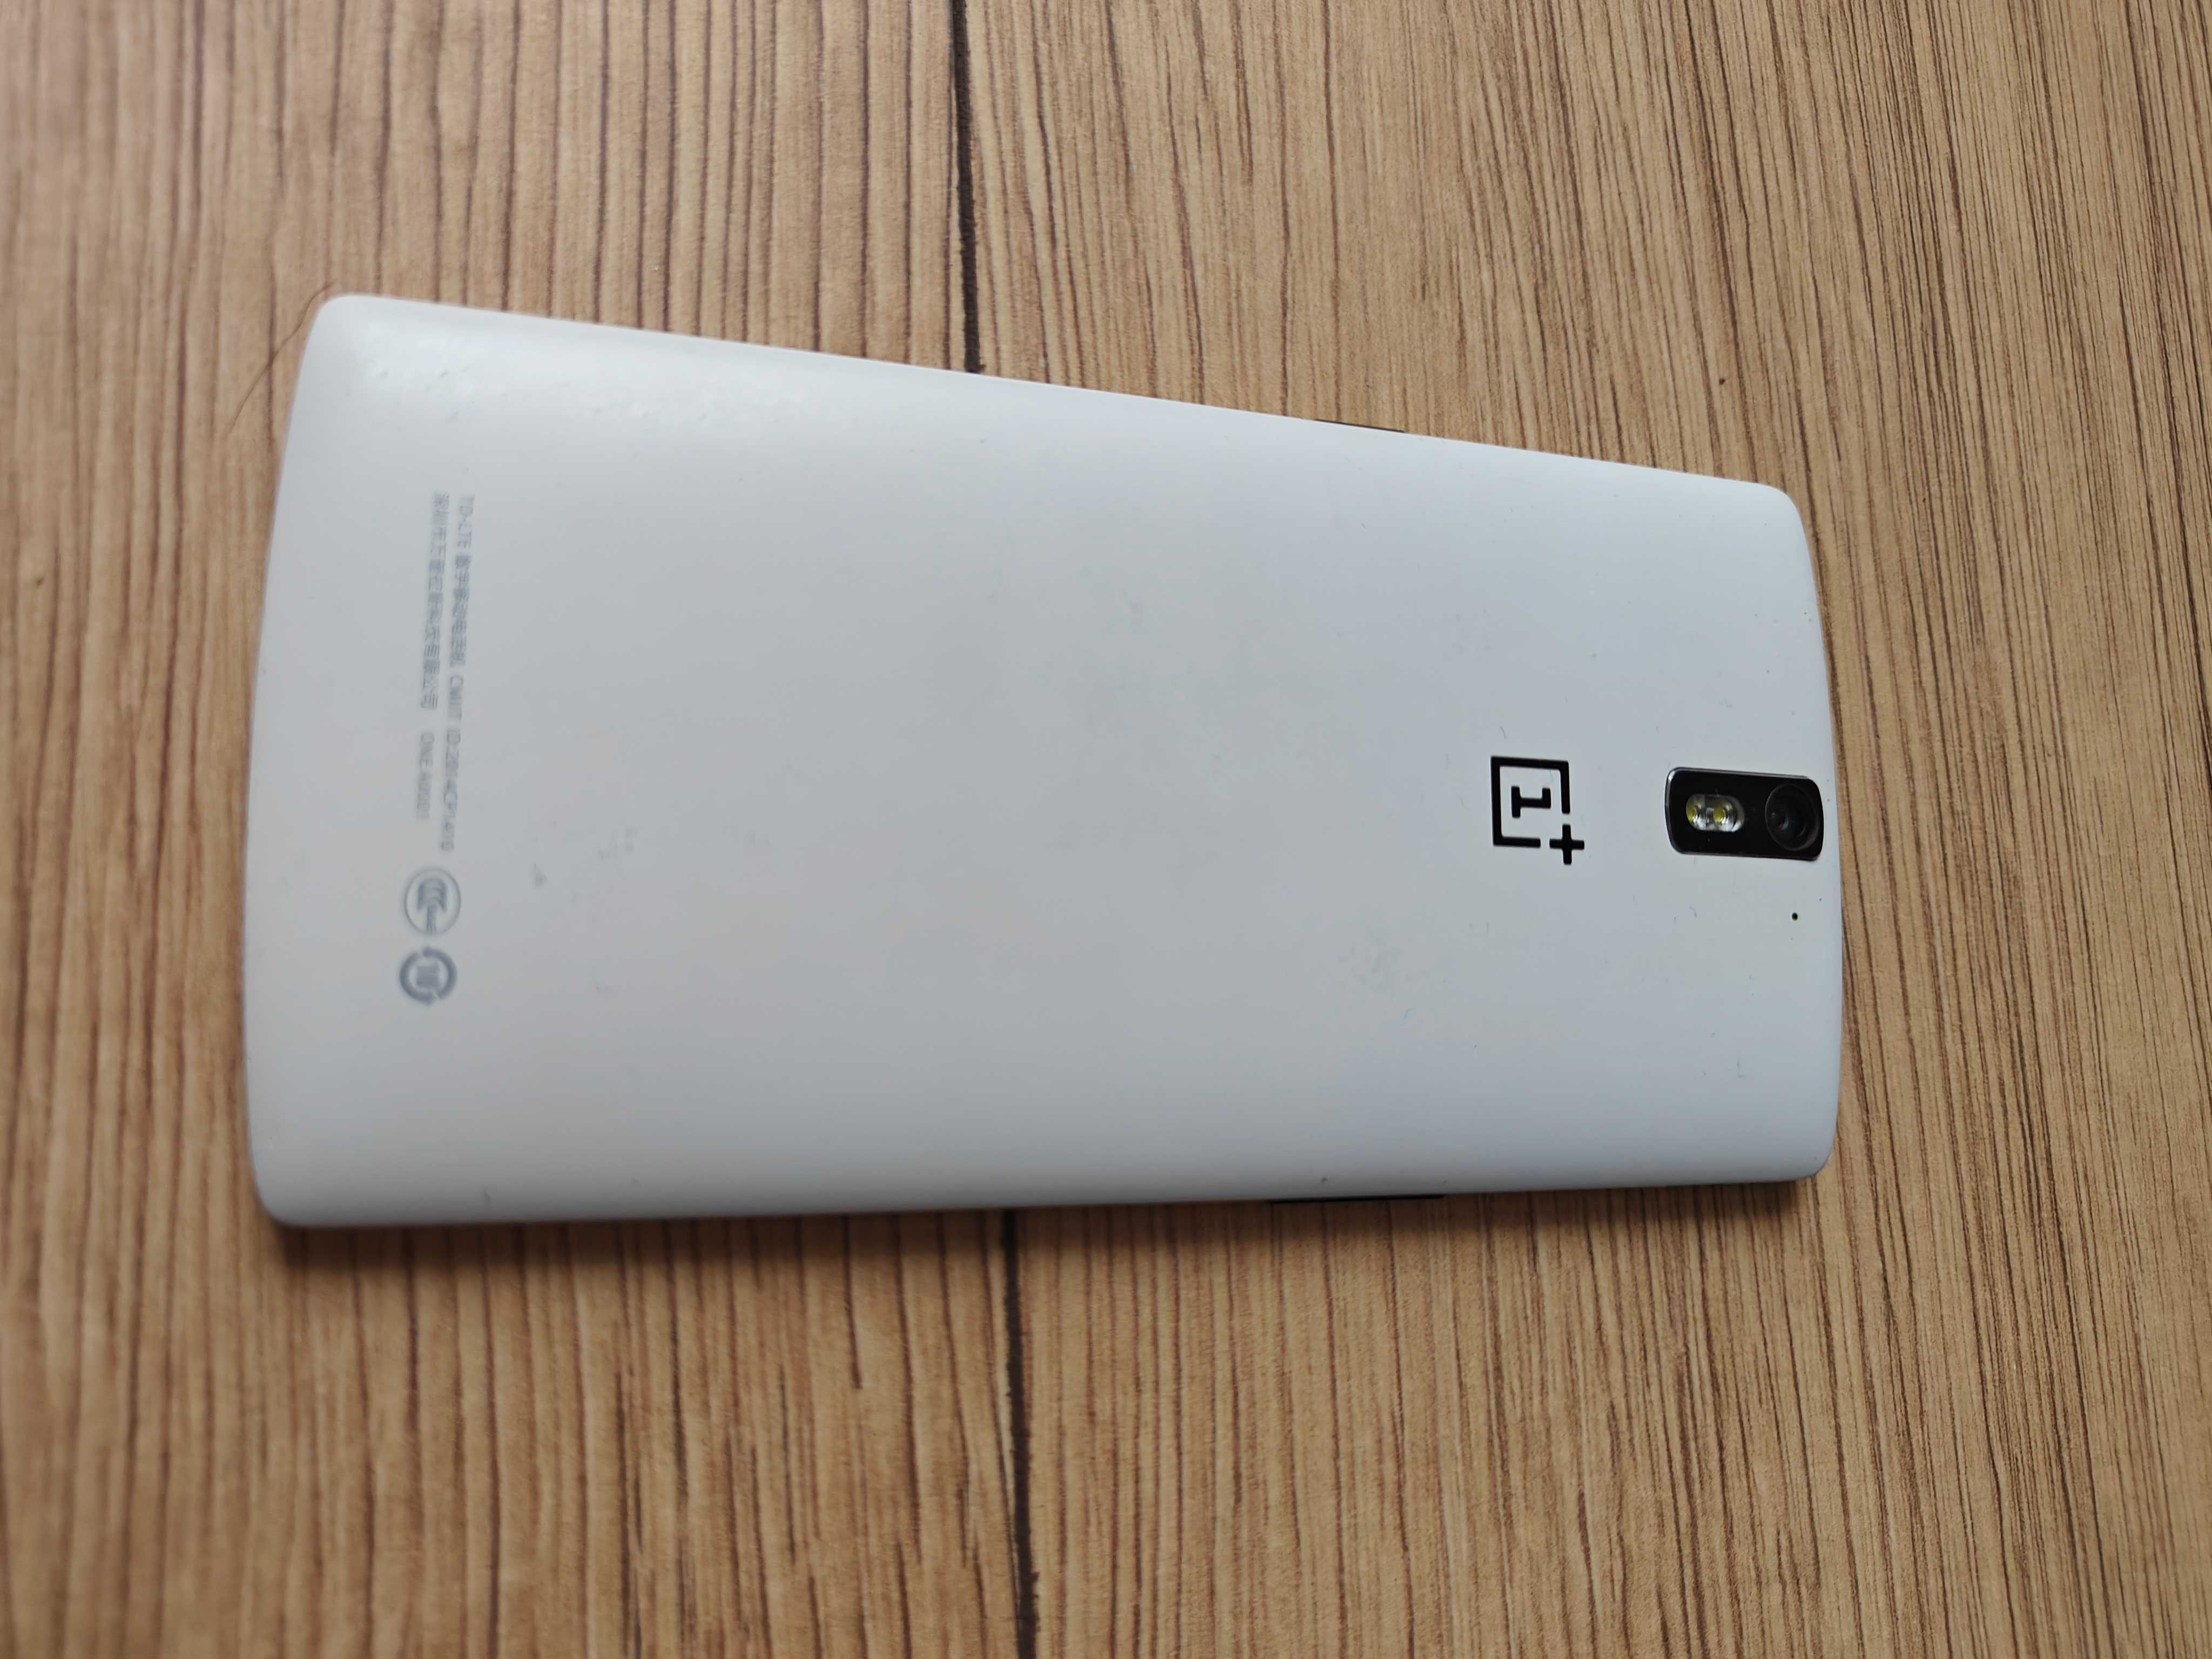 OnePlus One A0001